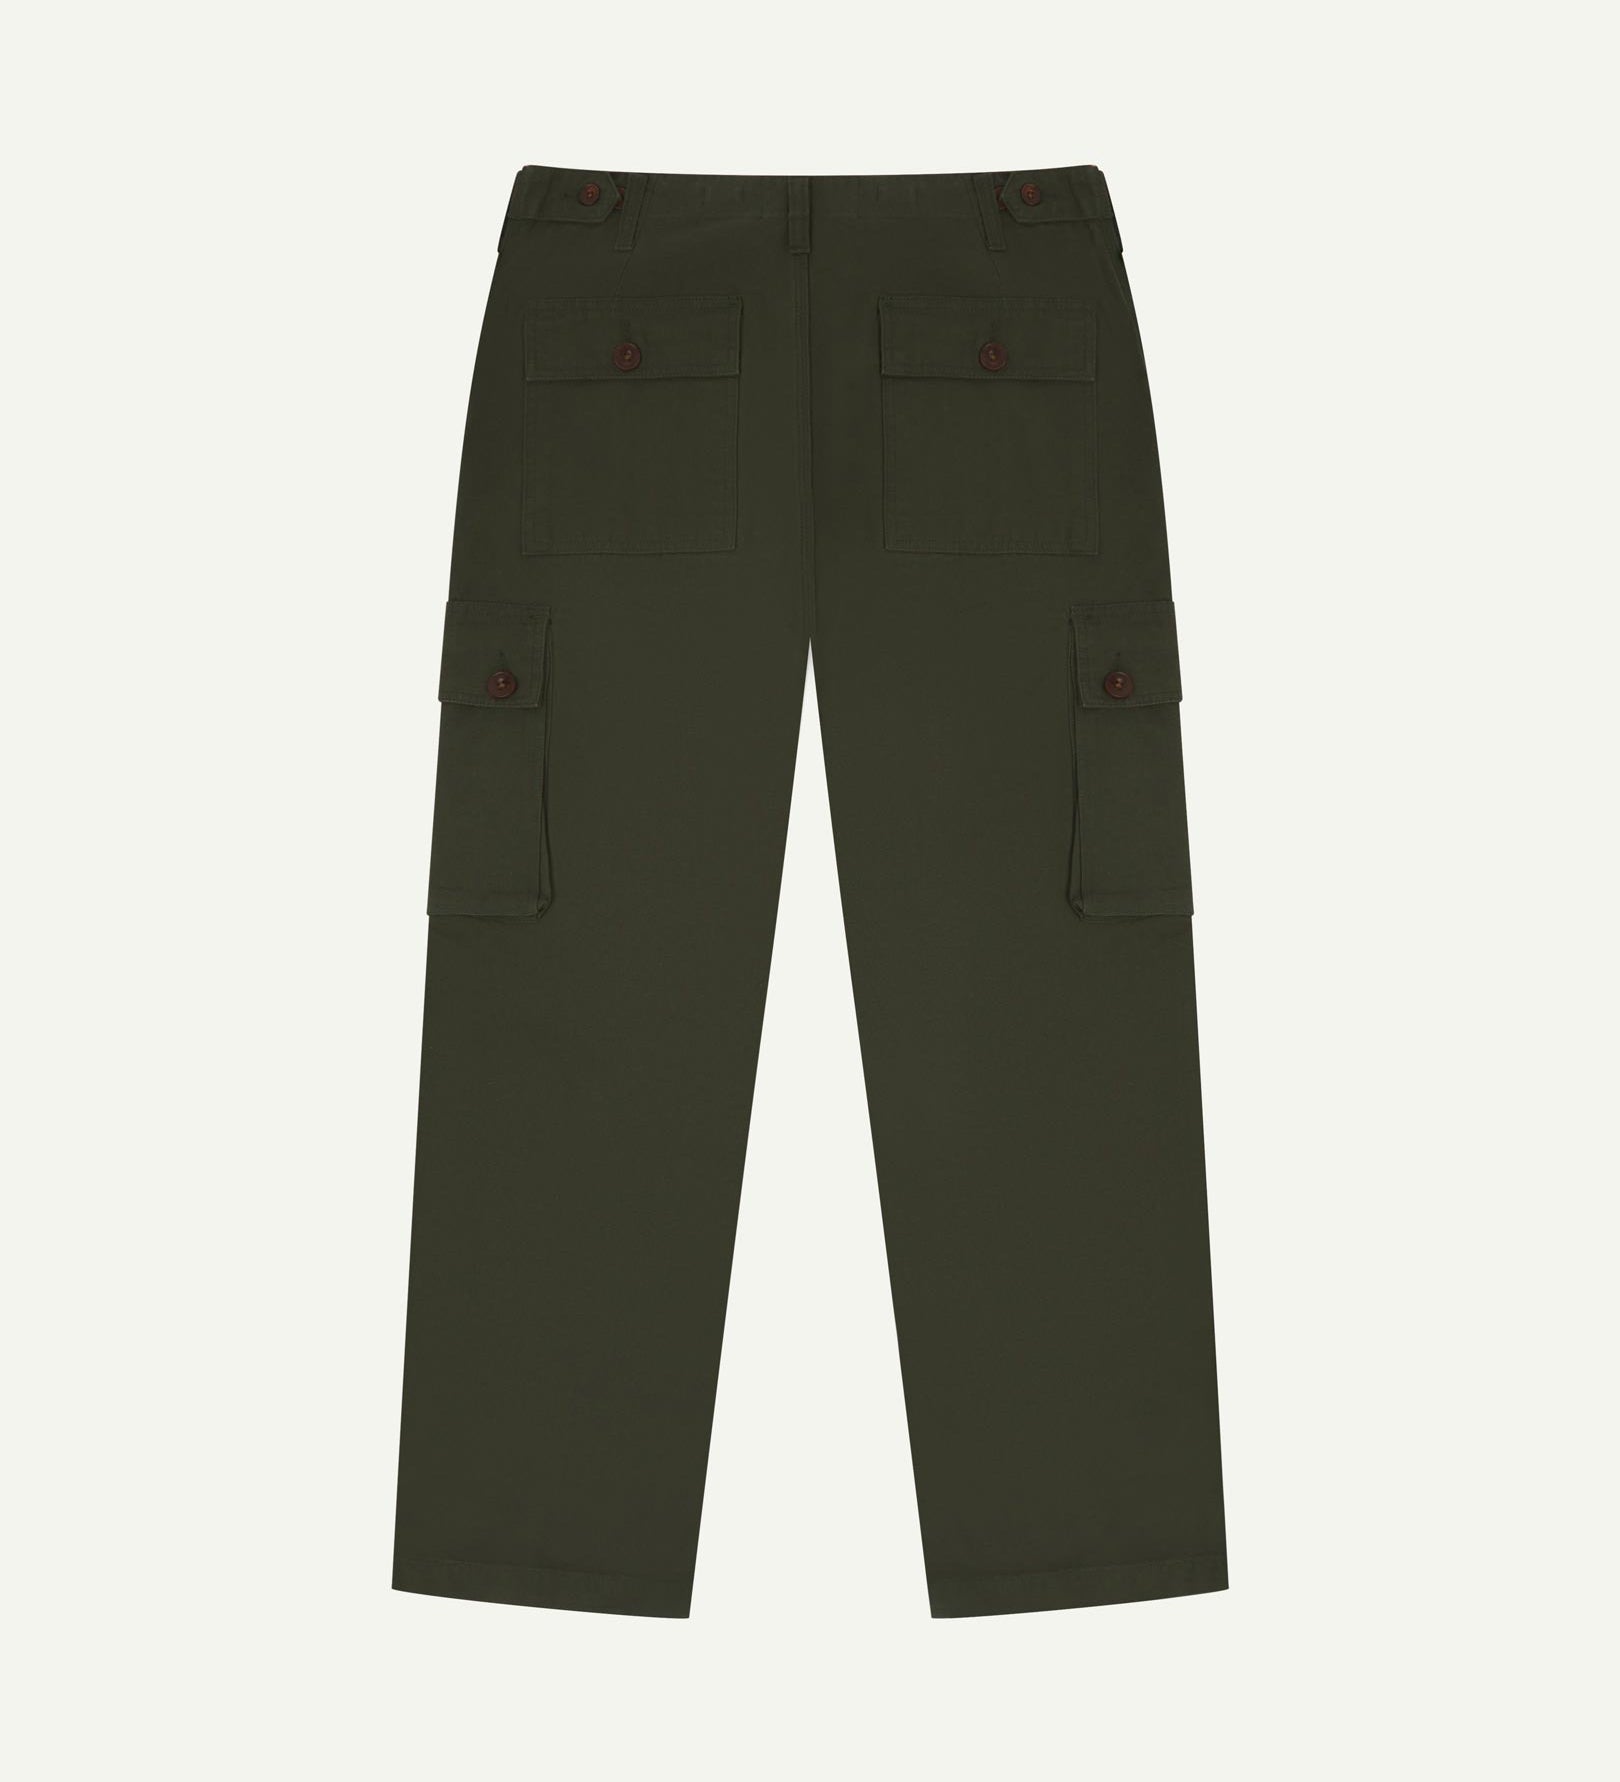 Reverse view of Uskees 5014 pants showing button-down back pockets and cargo pockets along with robust belt loops and waist adjuster along with wide leg silhouette. 